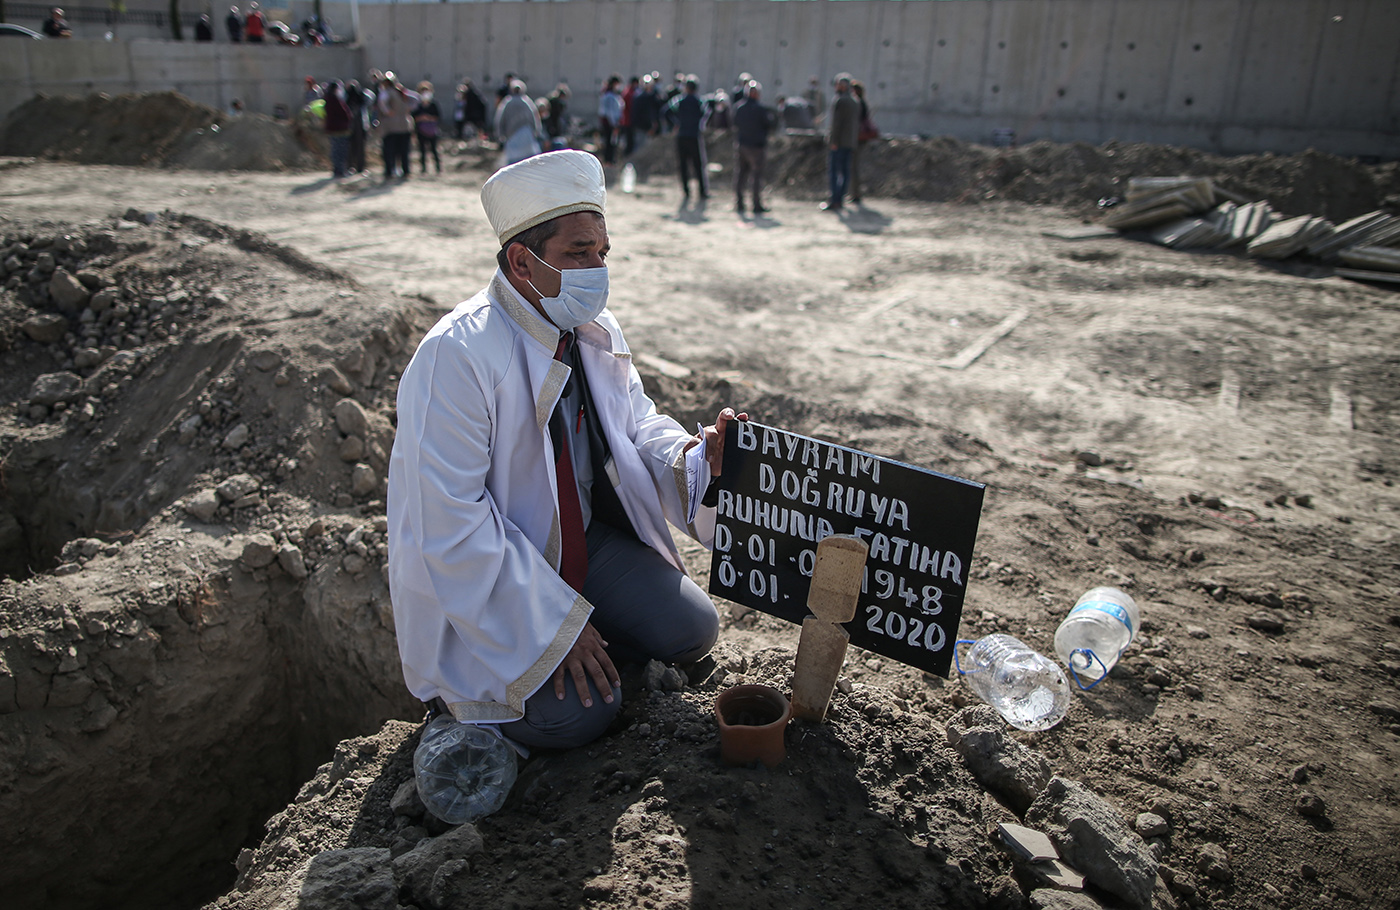 A Imam pray during a funeral ceremony of Bayram Dogruya and Hatice Dogruya  who are found dead under a collapse building after a 7.0 magnitude earthquake in the Aegean Sea, at Bayrakli district in Izmir, Turkey, 01 November 2020. According to Turkish media reports, at least fifty six people died while more than eight  hundreds were injured and dozens of buildings were destroyed in the earthquake.